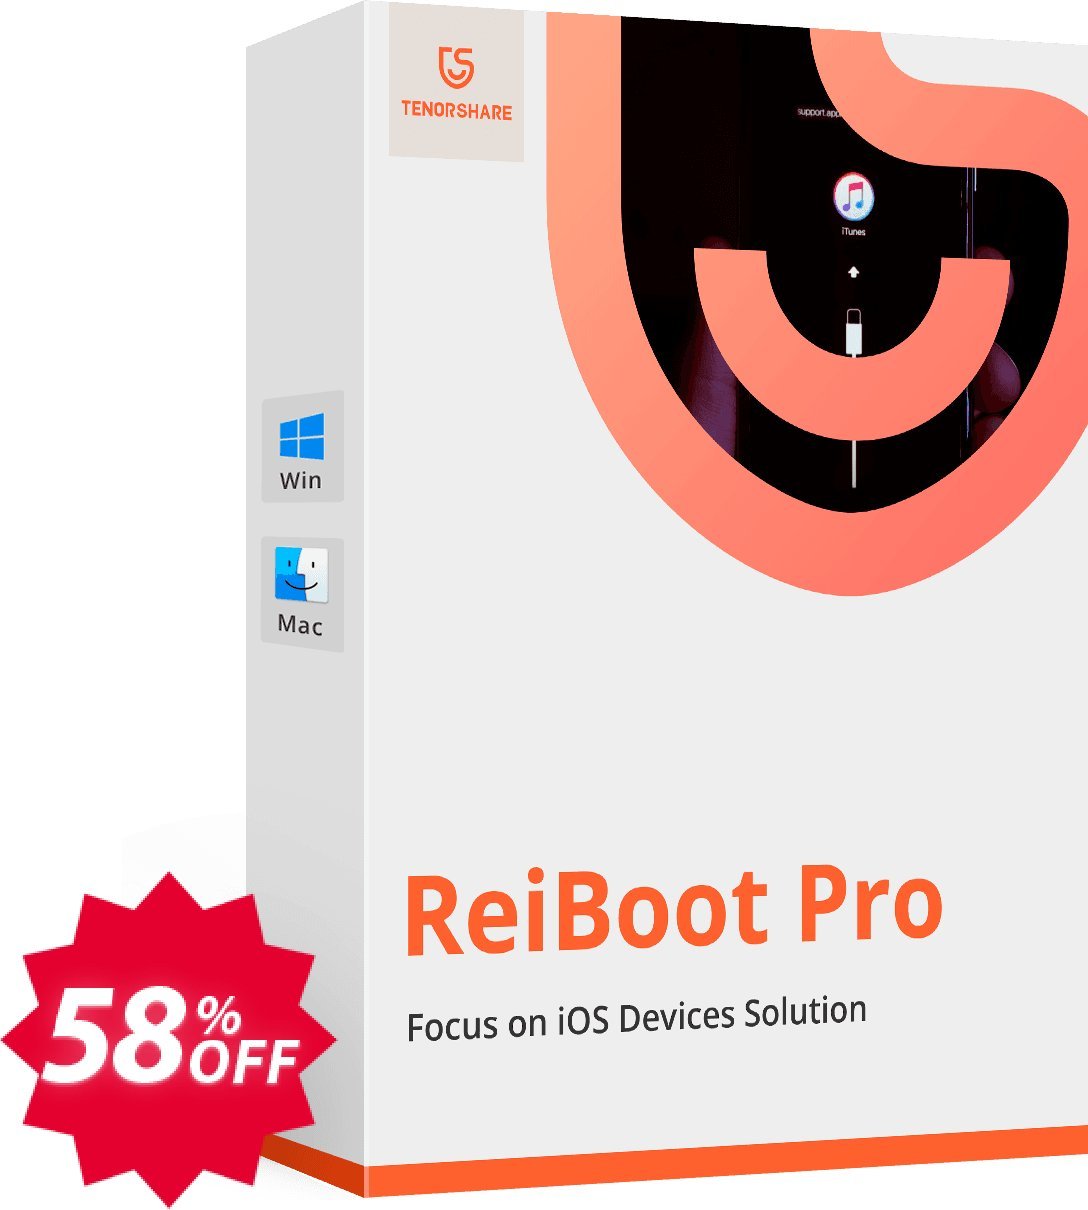 Tenorshare ReiBoot Pro for MAC Coupon code 58% discount 